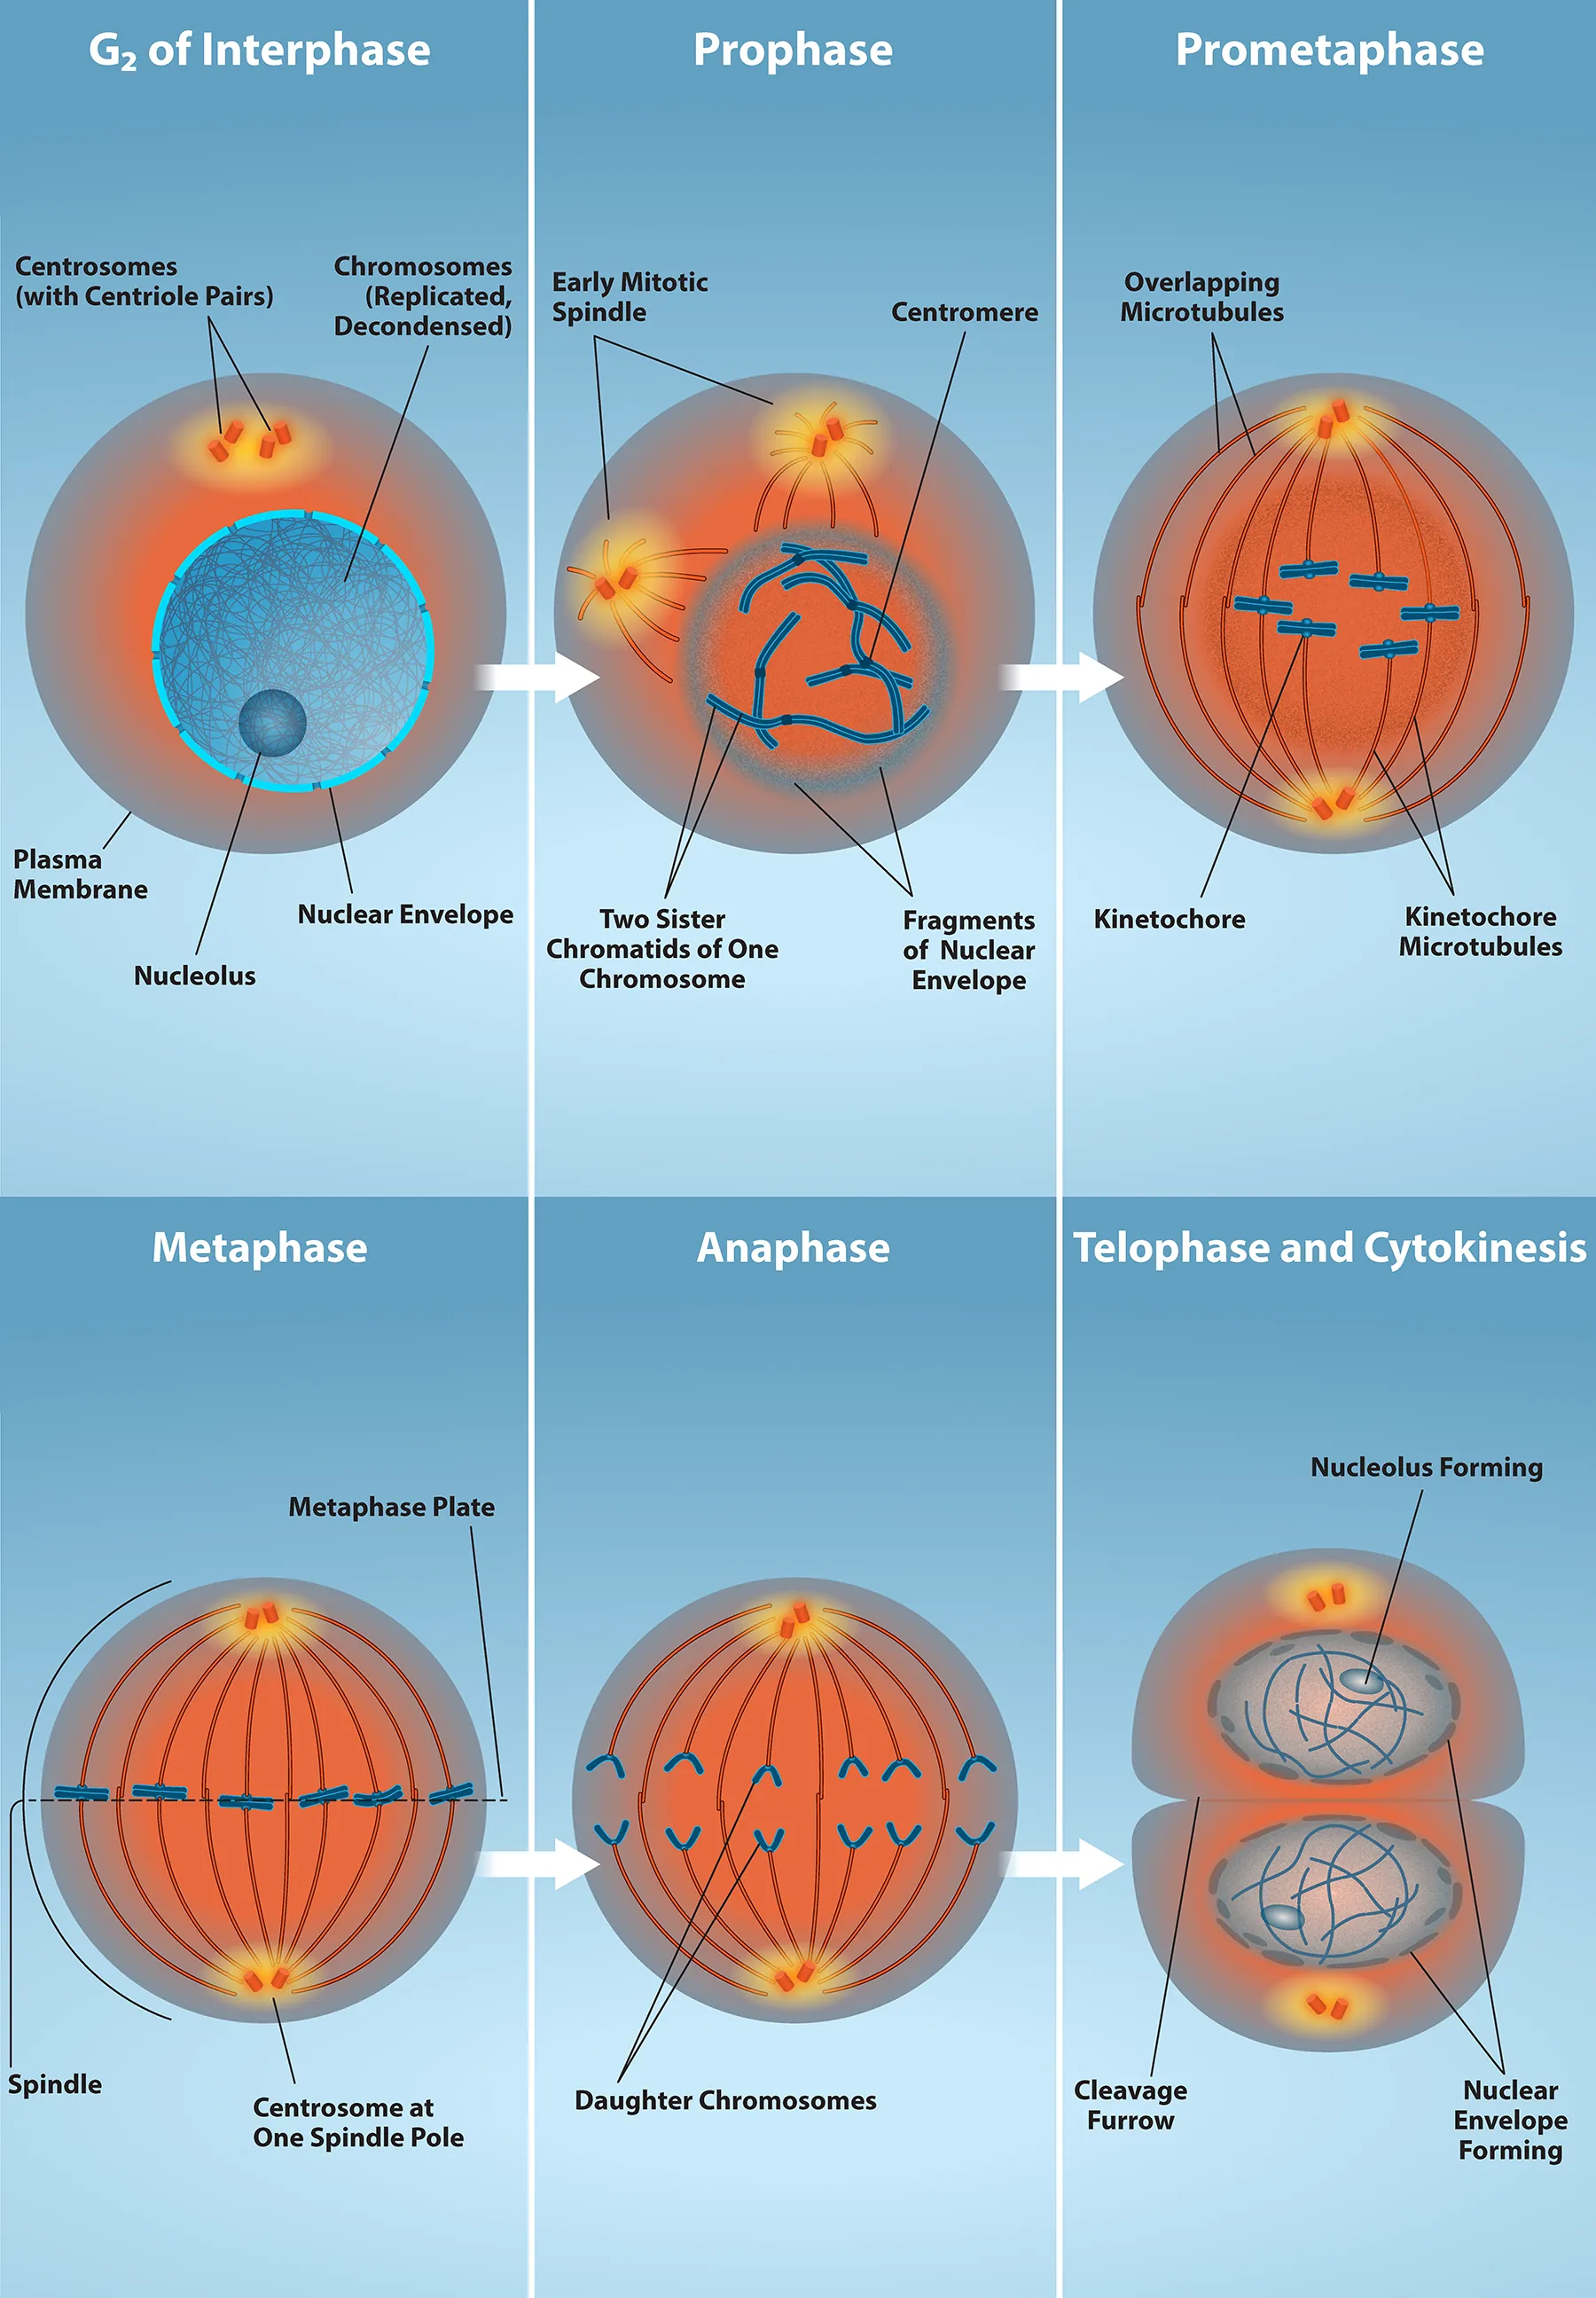 This diagram shows the five phases of mitosis and cytokinesis. During prophase, the chromosomes condense and become visible, spindle fibers emerge from the centrosomes, the nuclear envelope breaks down, and the nucleolus disappears. During prometaphase, the chromosomes continue to condense and kinetochores appear at the centromeres. Mitotic spindle microtubules attach to the kinetochores, and centrosomes move toward opposite poles. During metaphase, the mitotic spindle is fully developed, and centrosomes are at opposite poles of the cell. Chromosomes line up at the metaphase plate and each sister chromatid is attached to a spindle fiber originating from the opposite pole. During anaphase, the cohesin proteins that were binding the sister chromatids together break down. The sister chromatids, which are now called chromosomes, move toward opposite poles of the cell. Non-kinetochore spindle fibers lengthen, elongating the cell. During telophase, chromosomes arrive at the opposite poles and begin to decondense. The nuclear envelope reforms. During cytokinesis in animals, a cleavage furrow separates the two daughter cells. In plants, a cell plate separates the two cells.